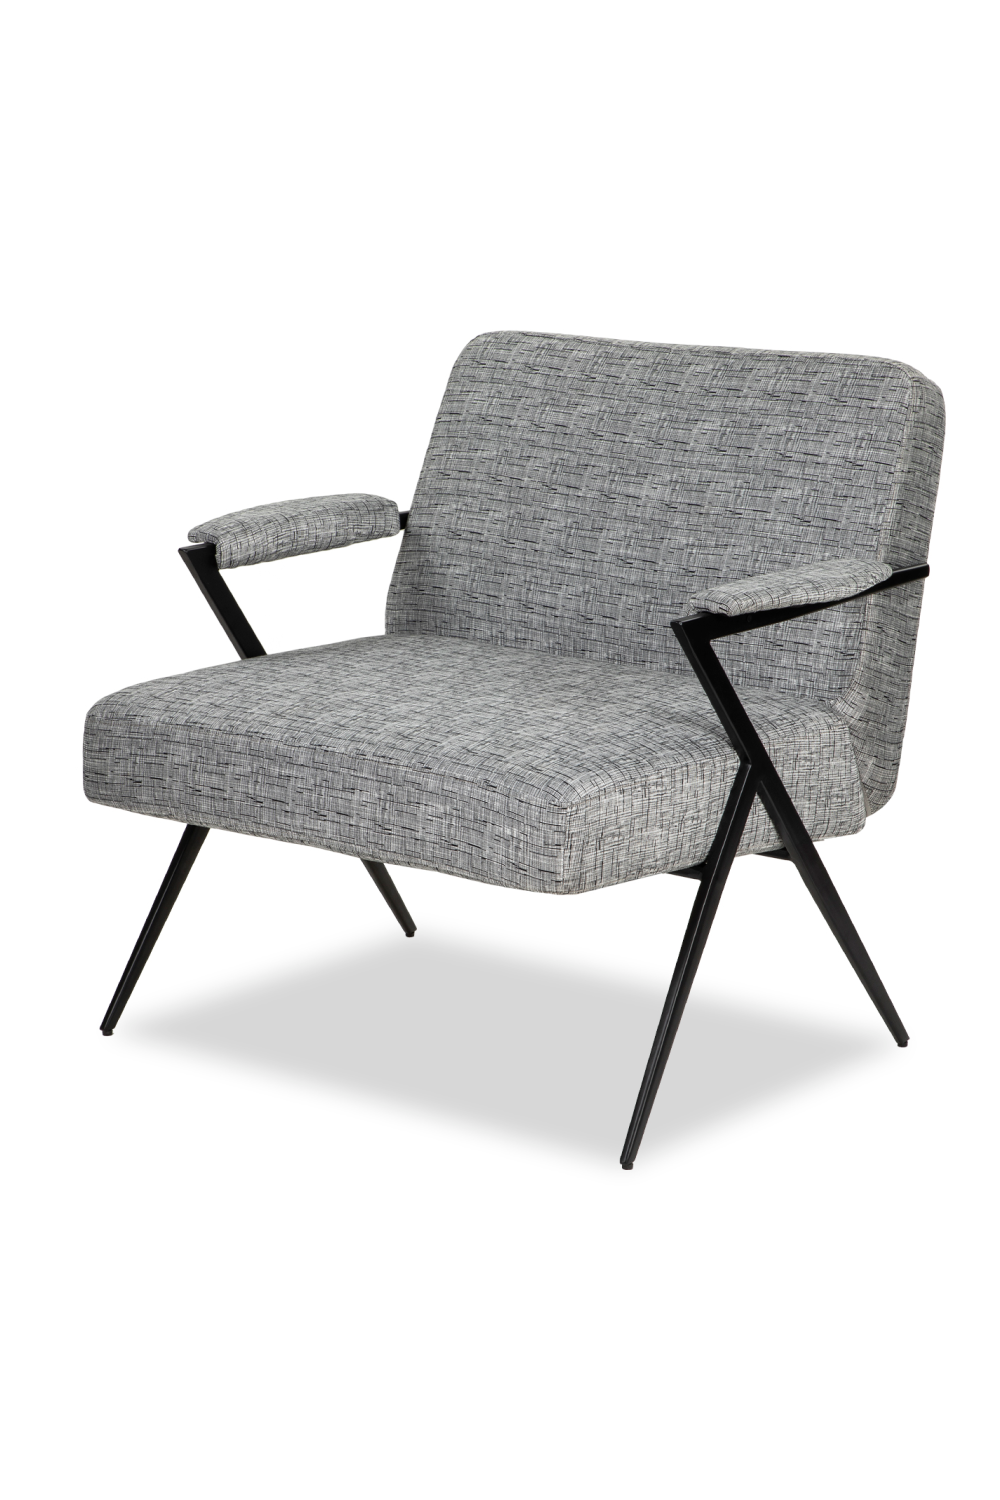 Black And White Occasional Chair | Liang & Eimil Ponti | OROA.com